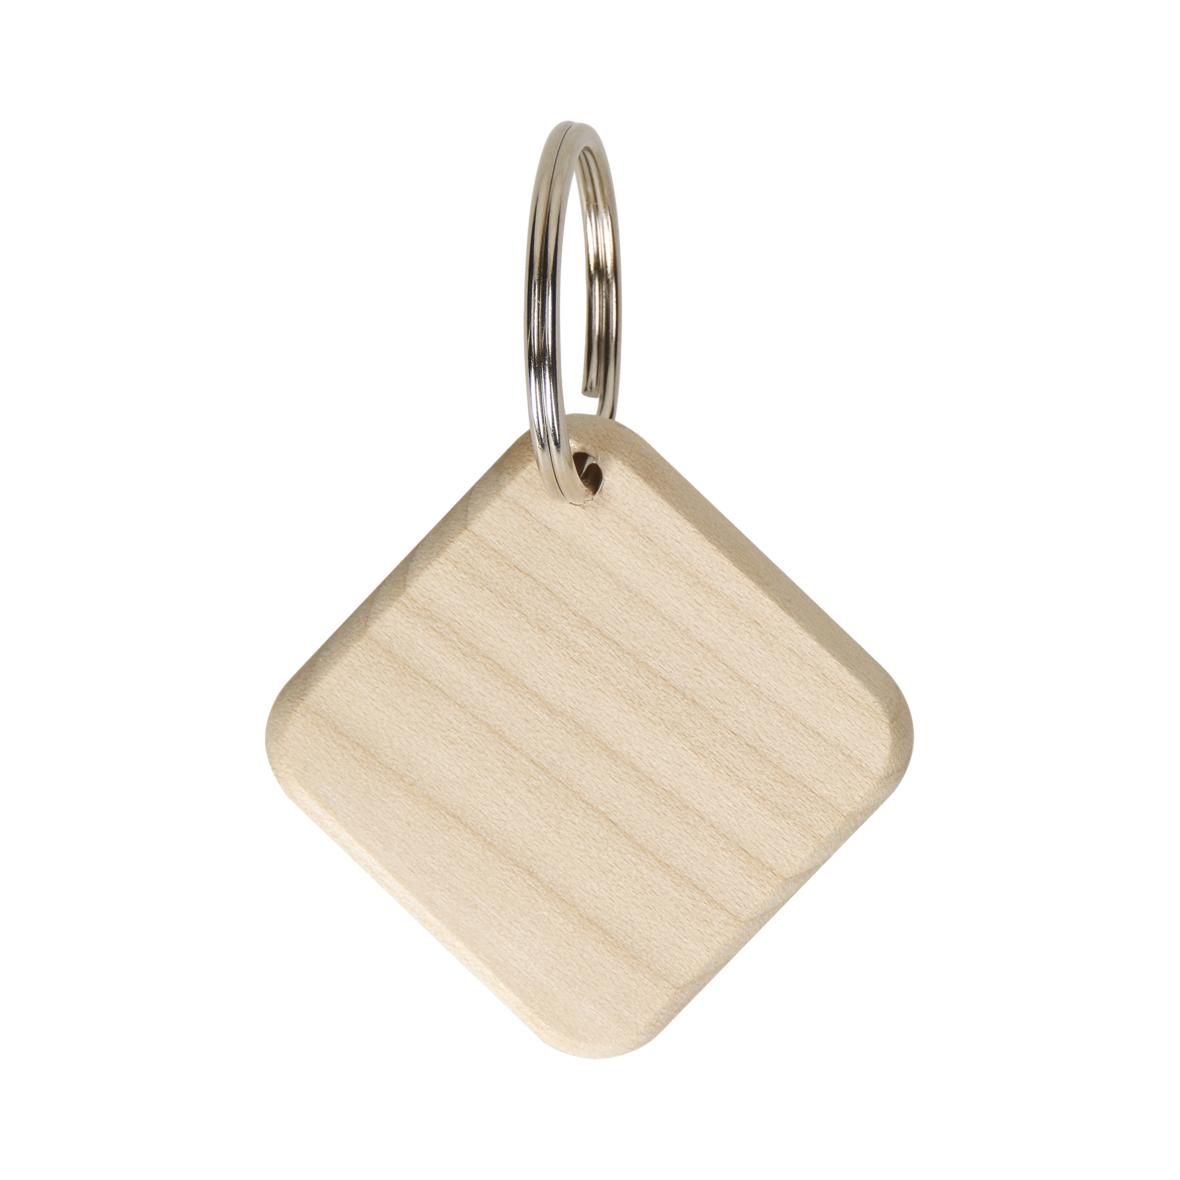 A key ring in the shape of a square, crafted from Maplewood, from the Chipstable brand. - Lulworth Cove